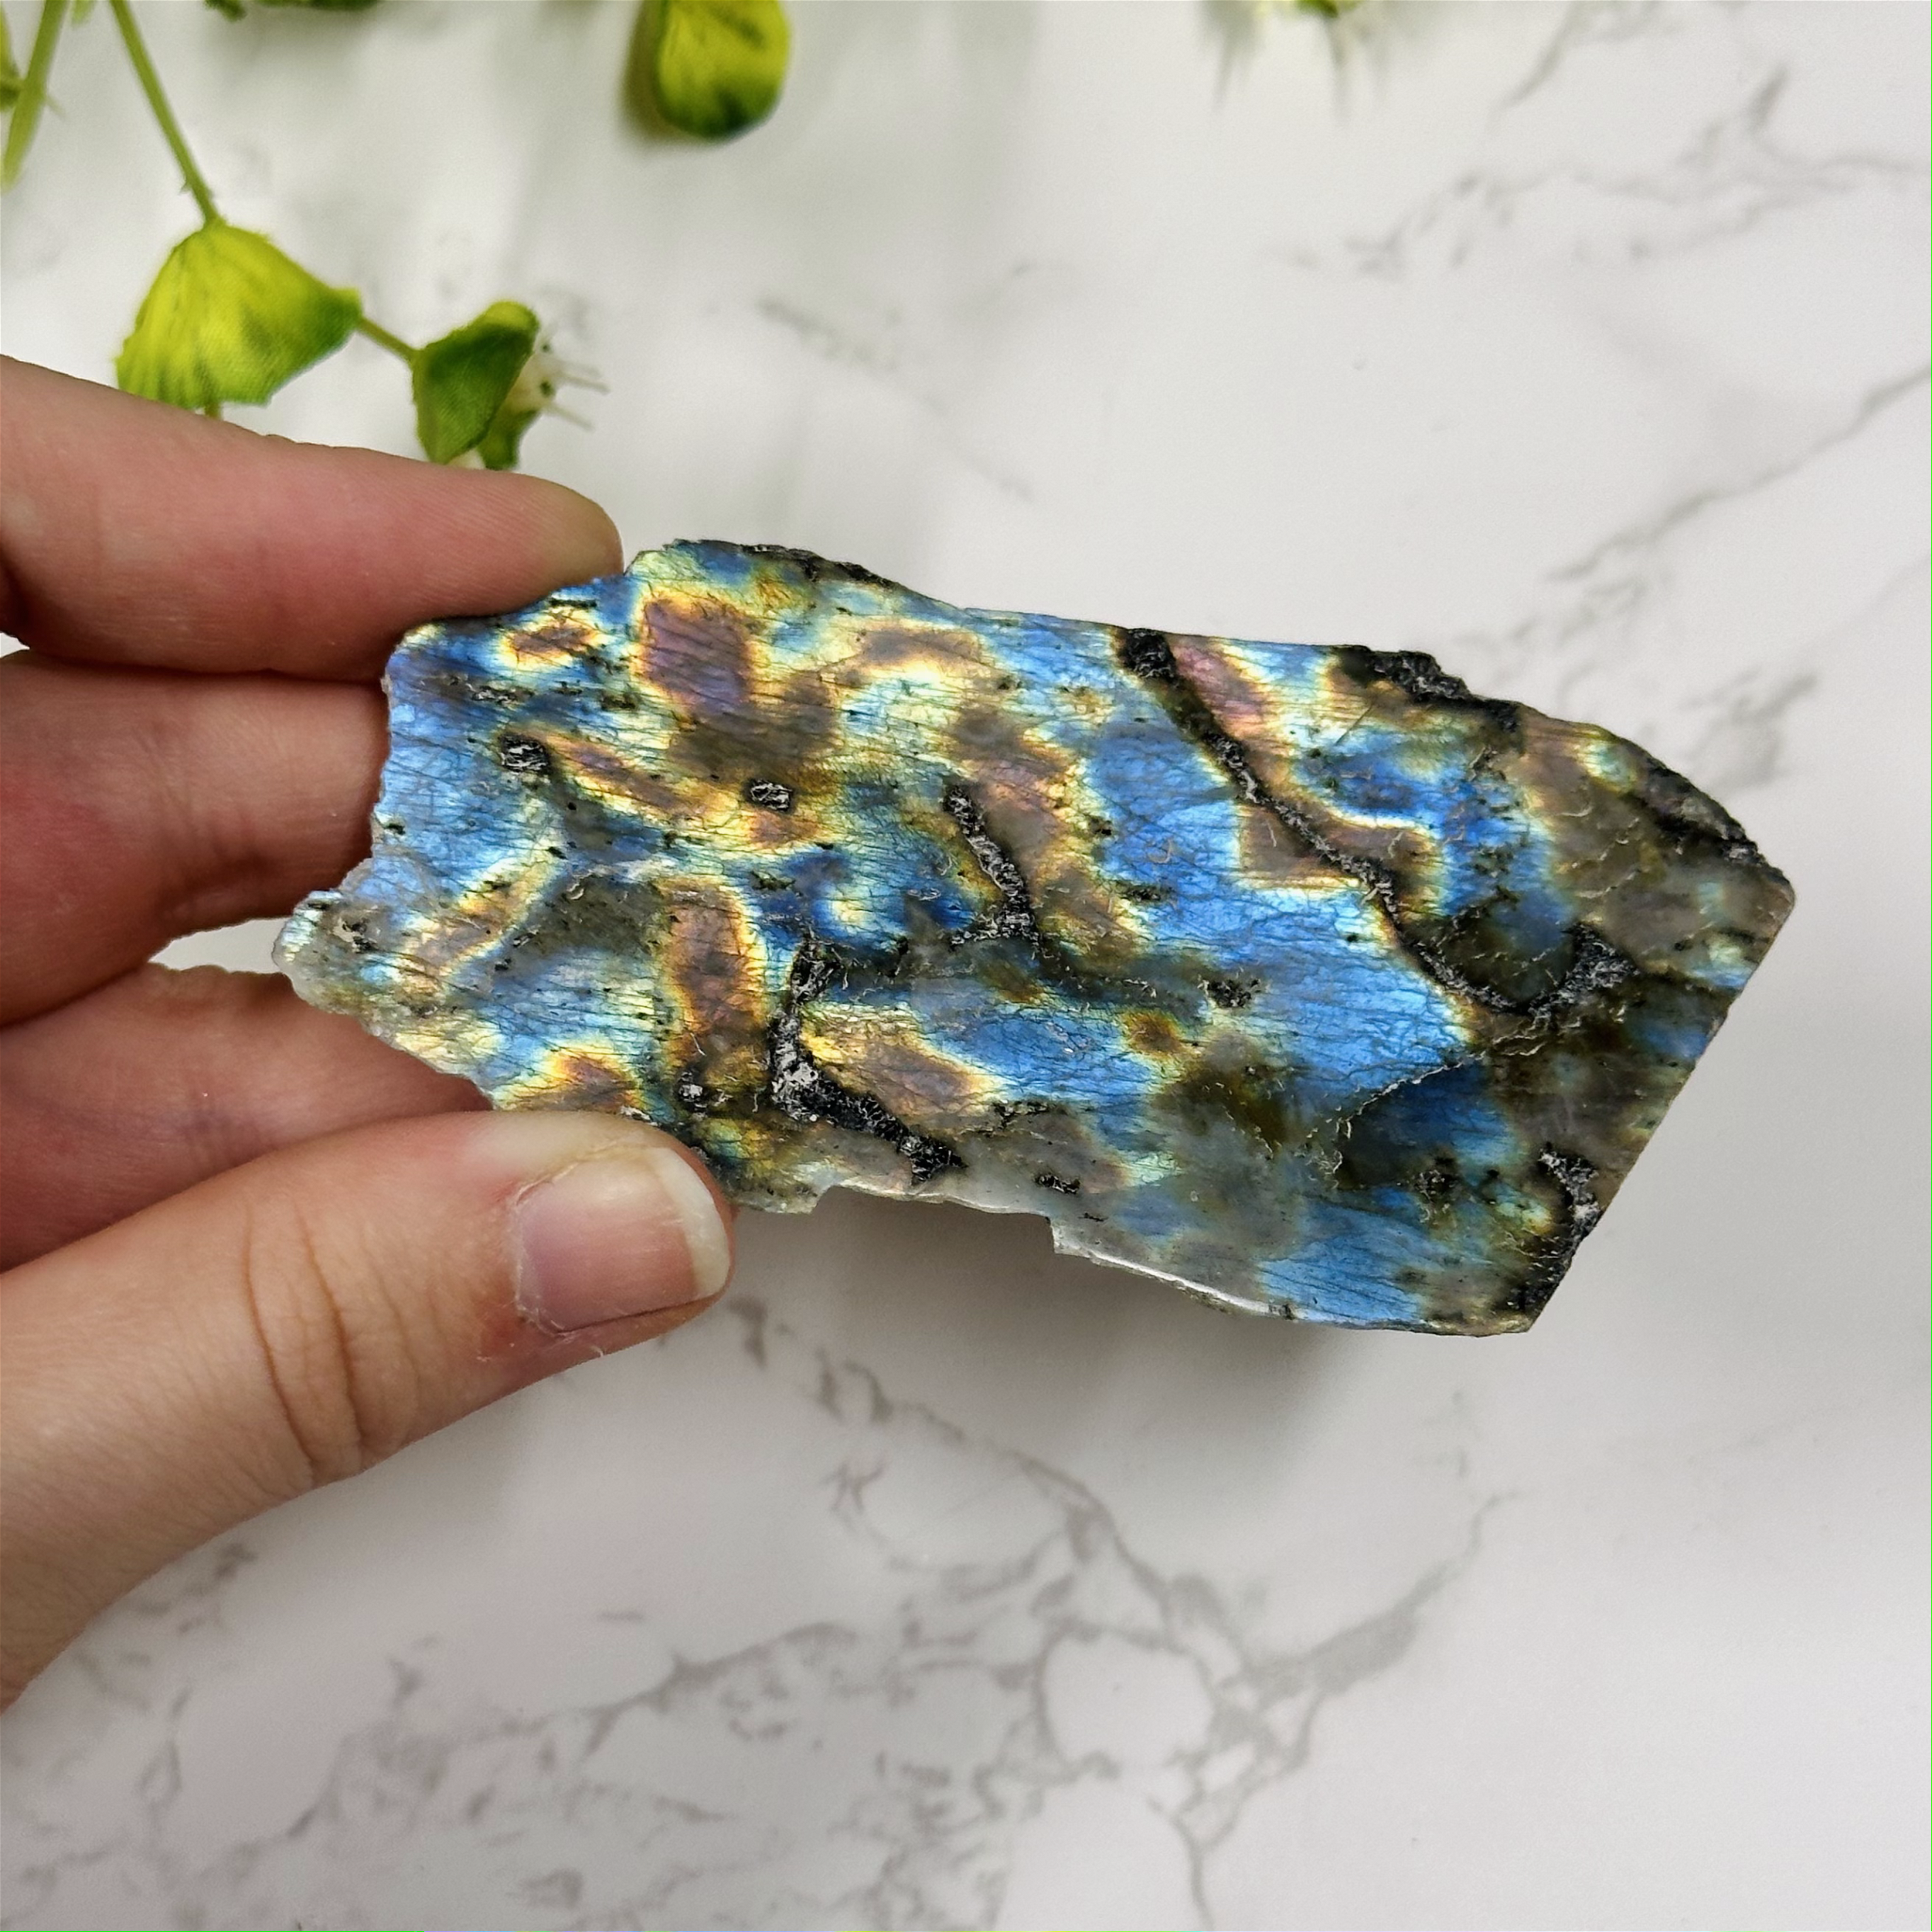 High Quality Labradorite Specimen with Natural Edge (Free Stand with Purchase)